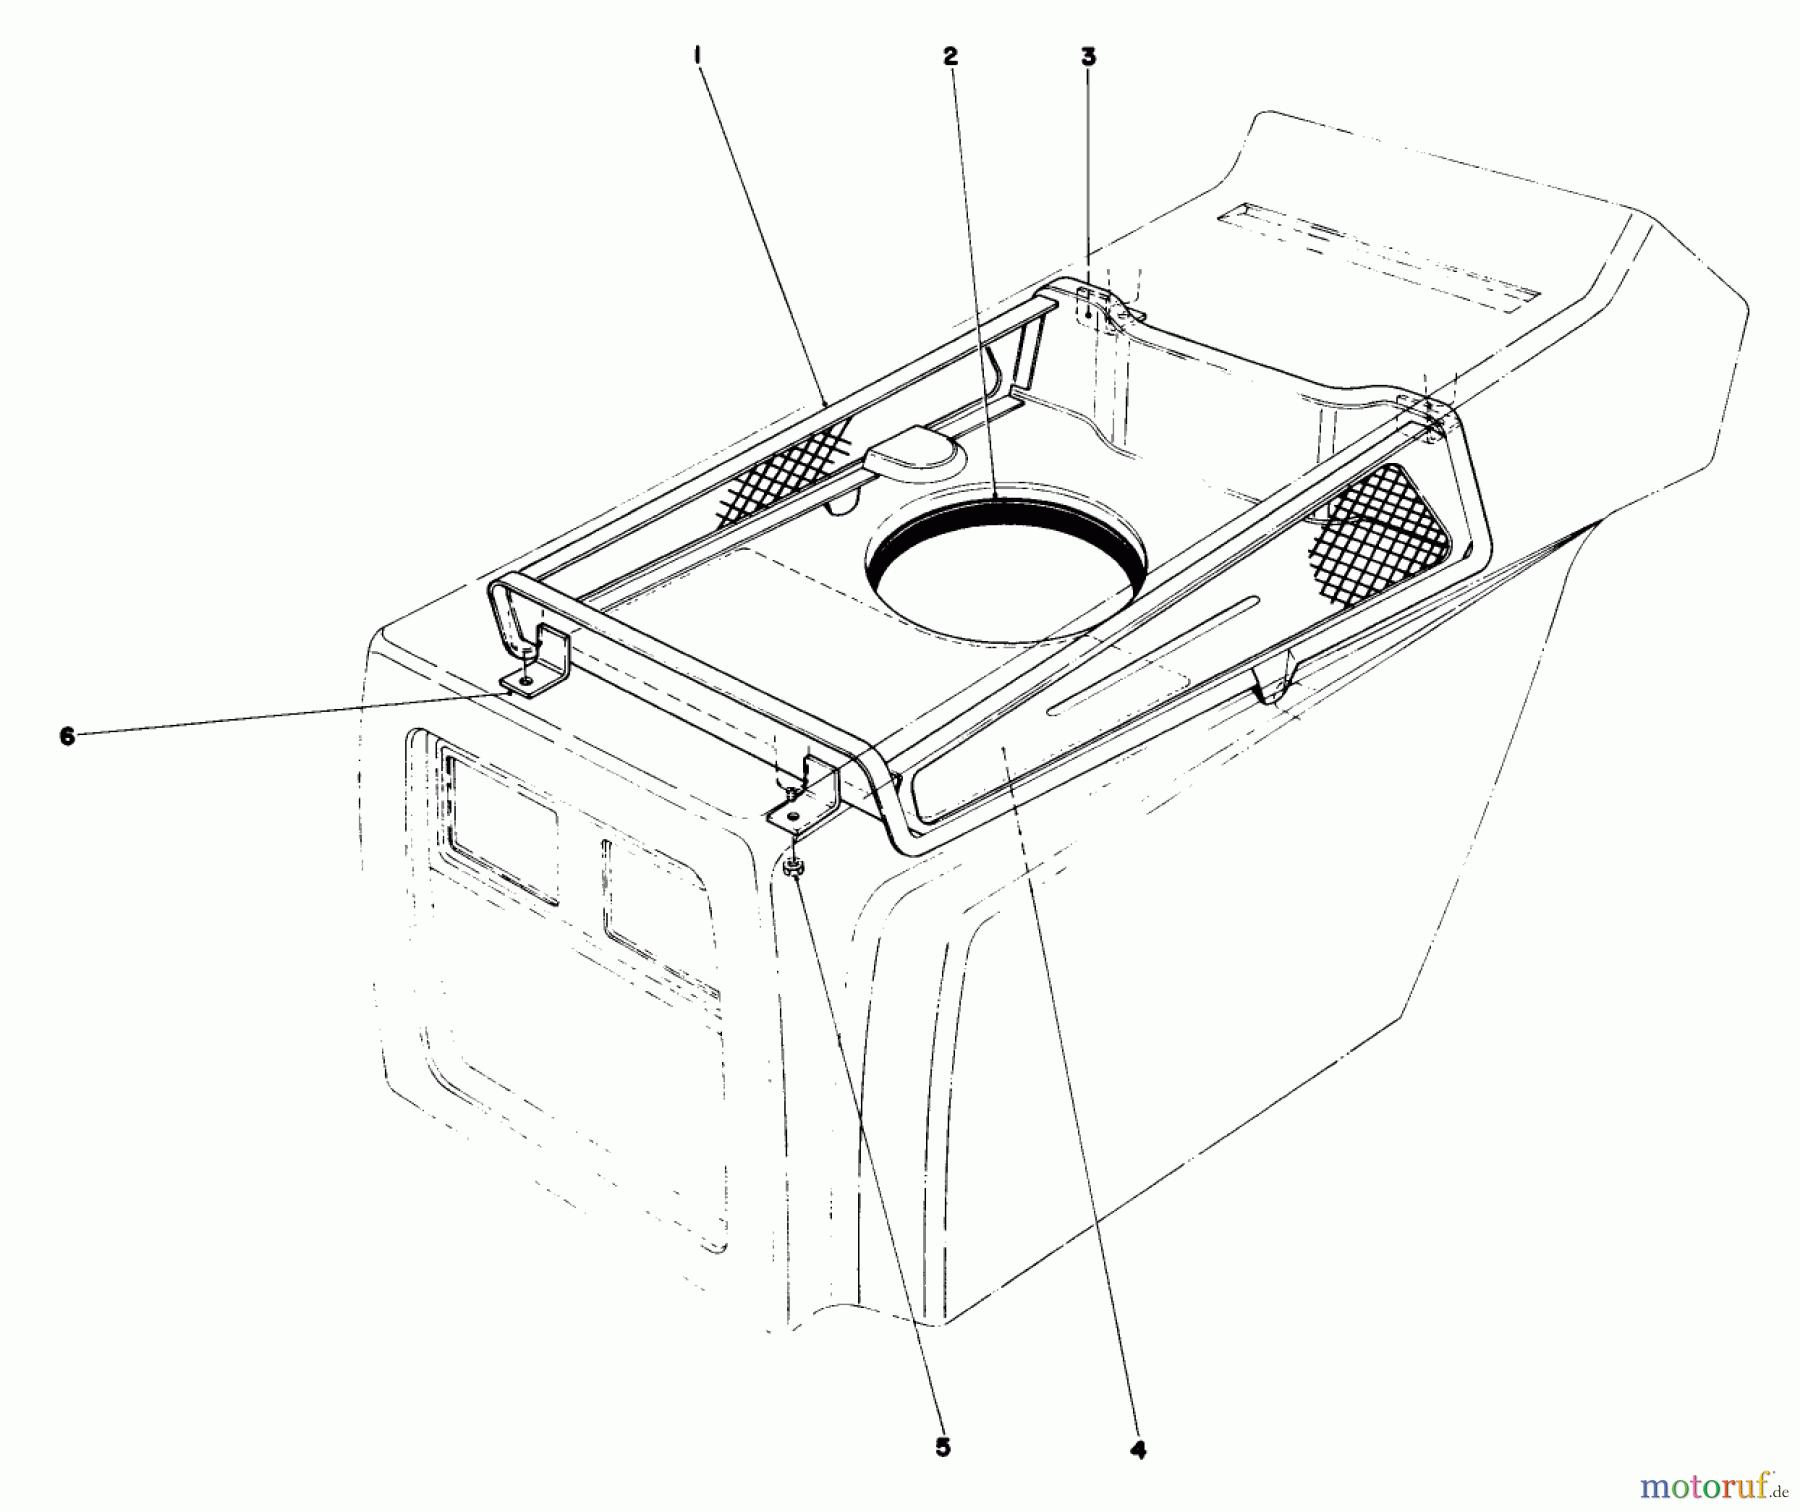  Toro Neu Mowers, Lawn & Garden Tractor Seite 1 57357 (11-44) - Toro 11-44 Lawn Tractor, 1983 (3000001-3999999) HOOD DUCT ASSEMBLY